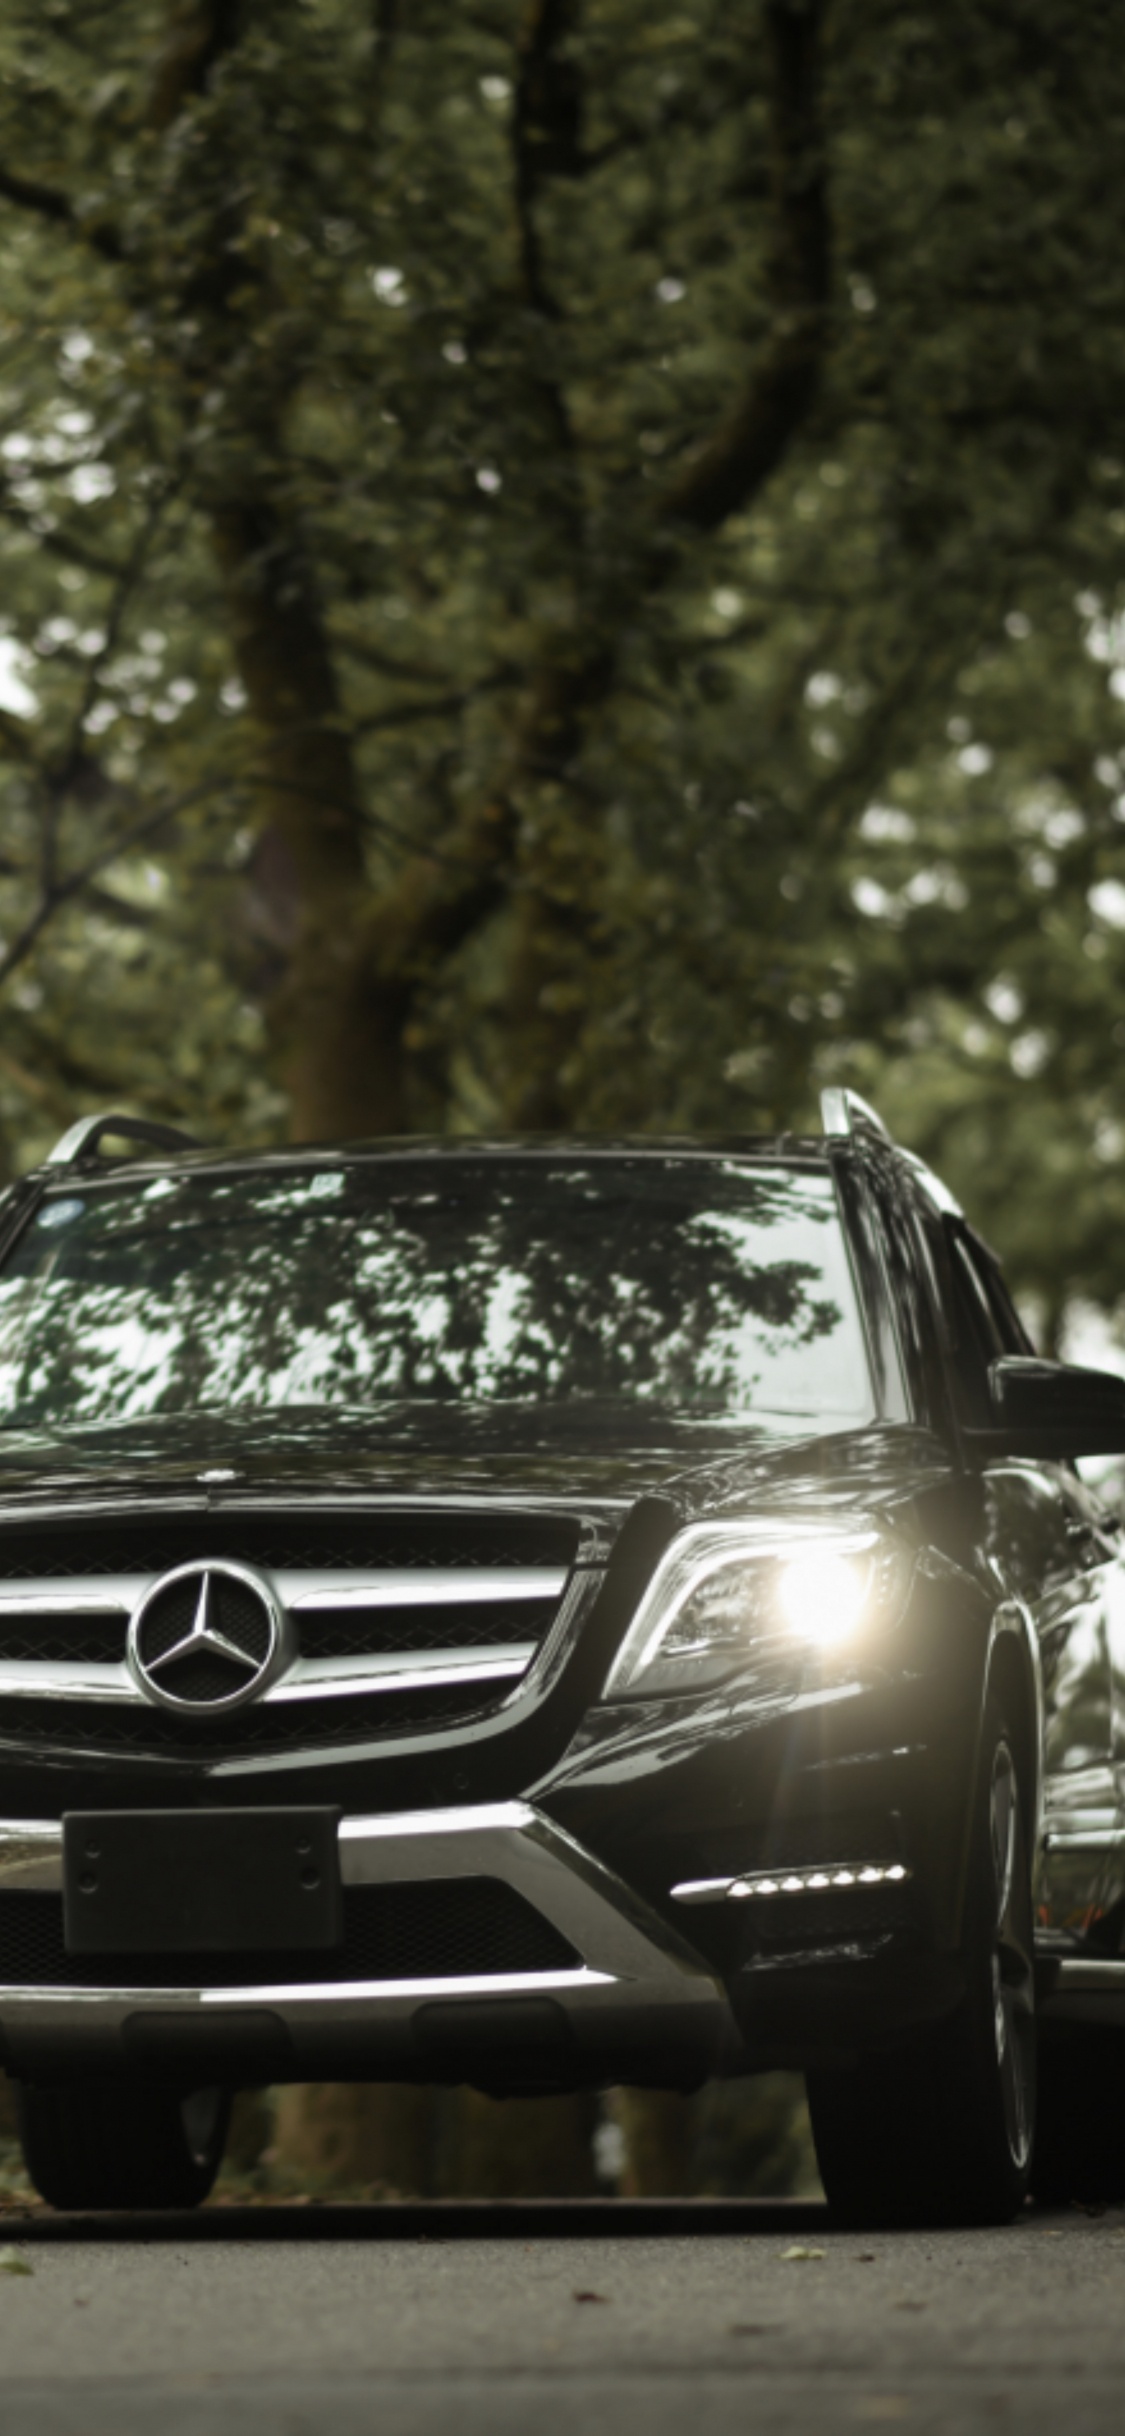 Black Mercedes Benz Car on Forest During Daytime. Wallpaper in 1125x2436 Resolution